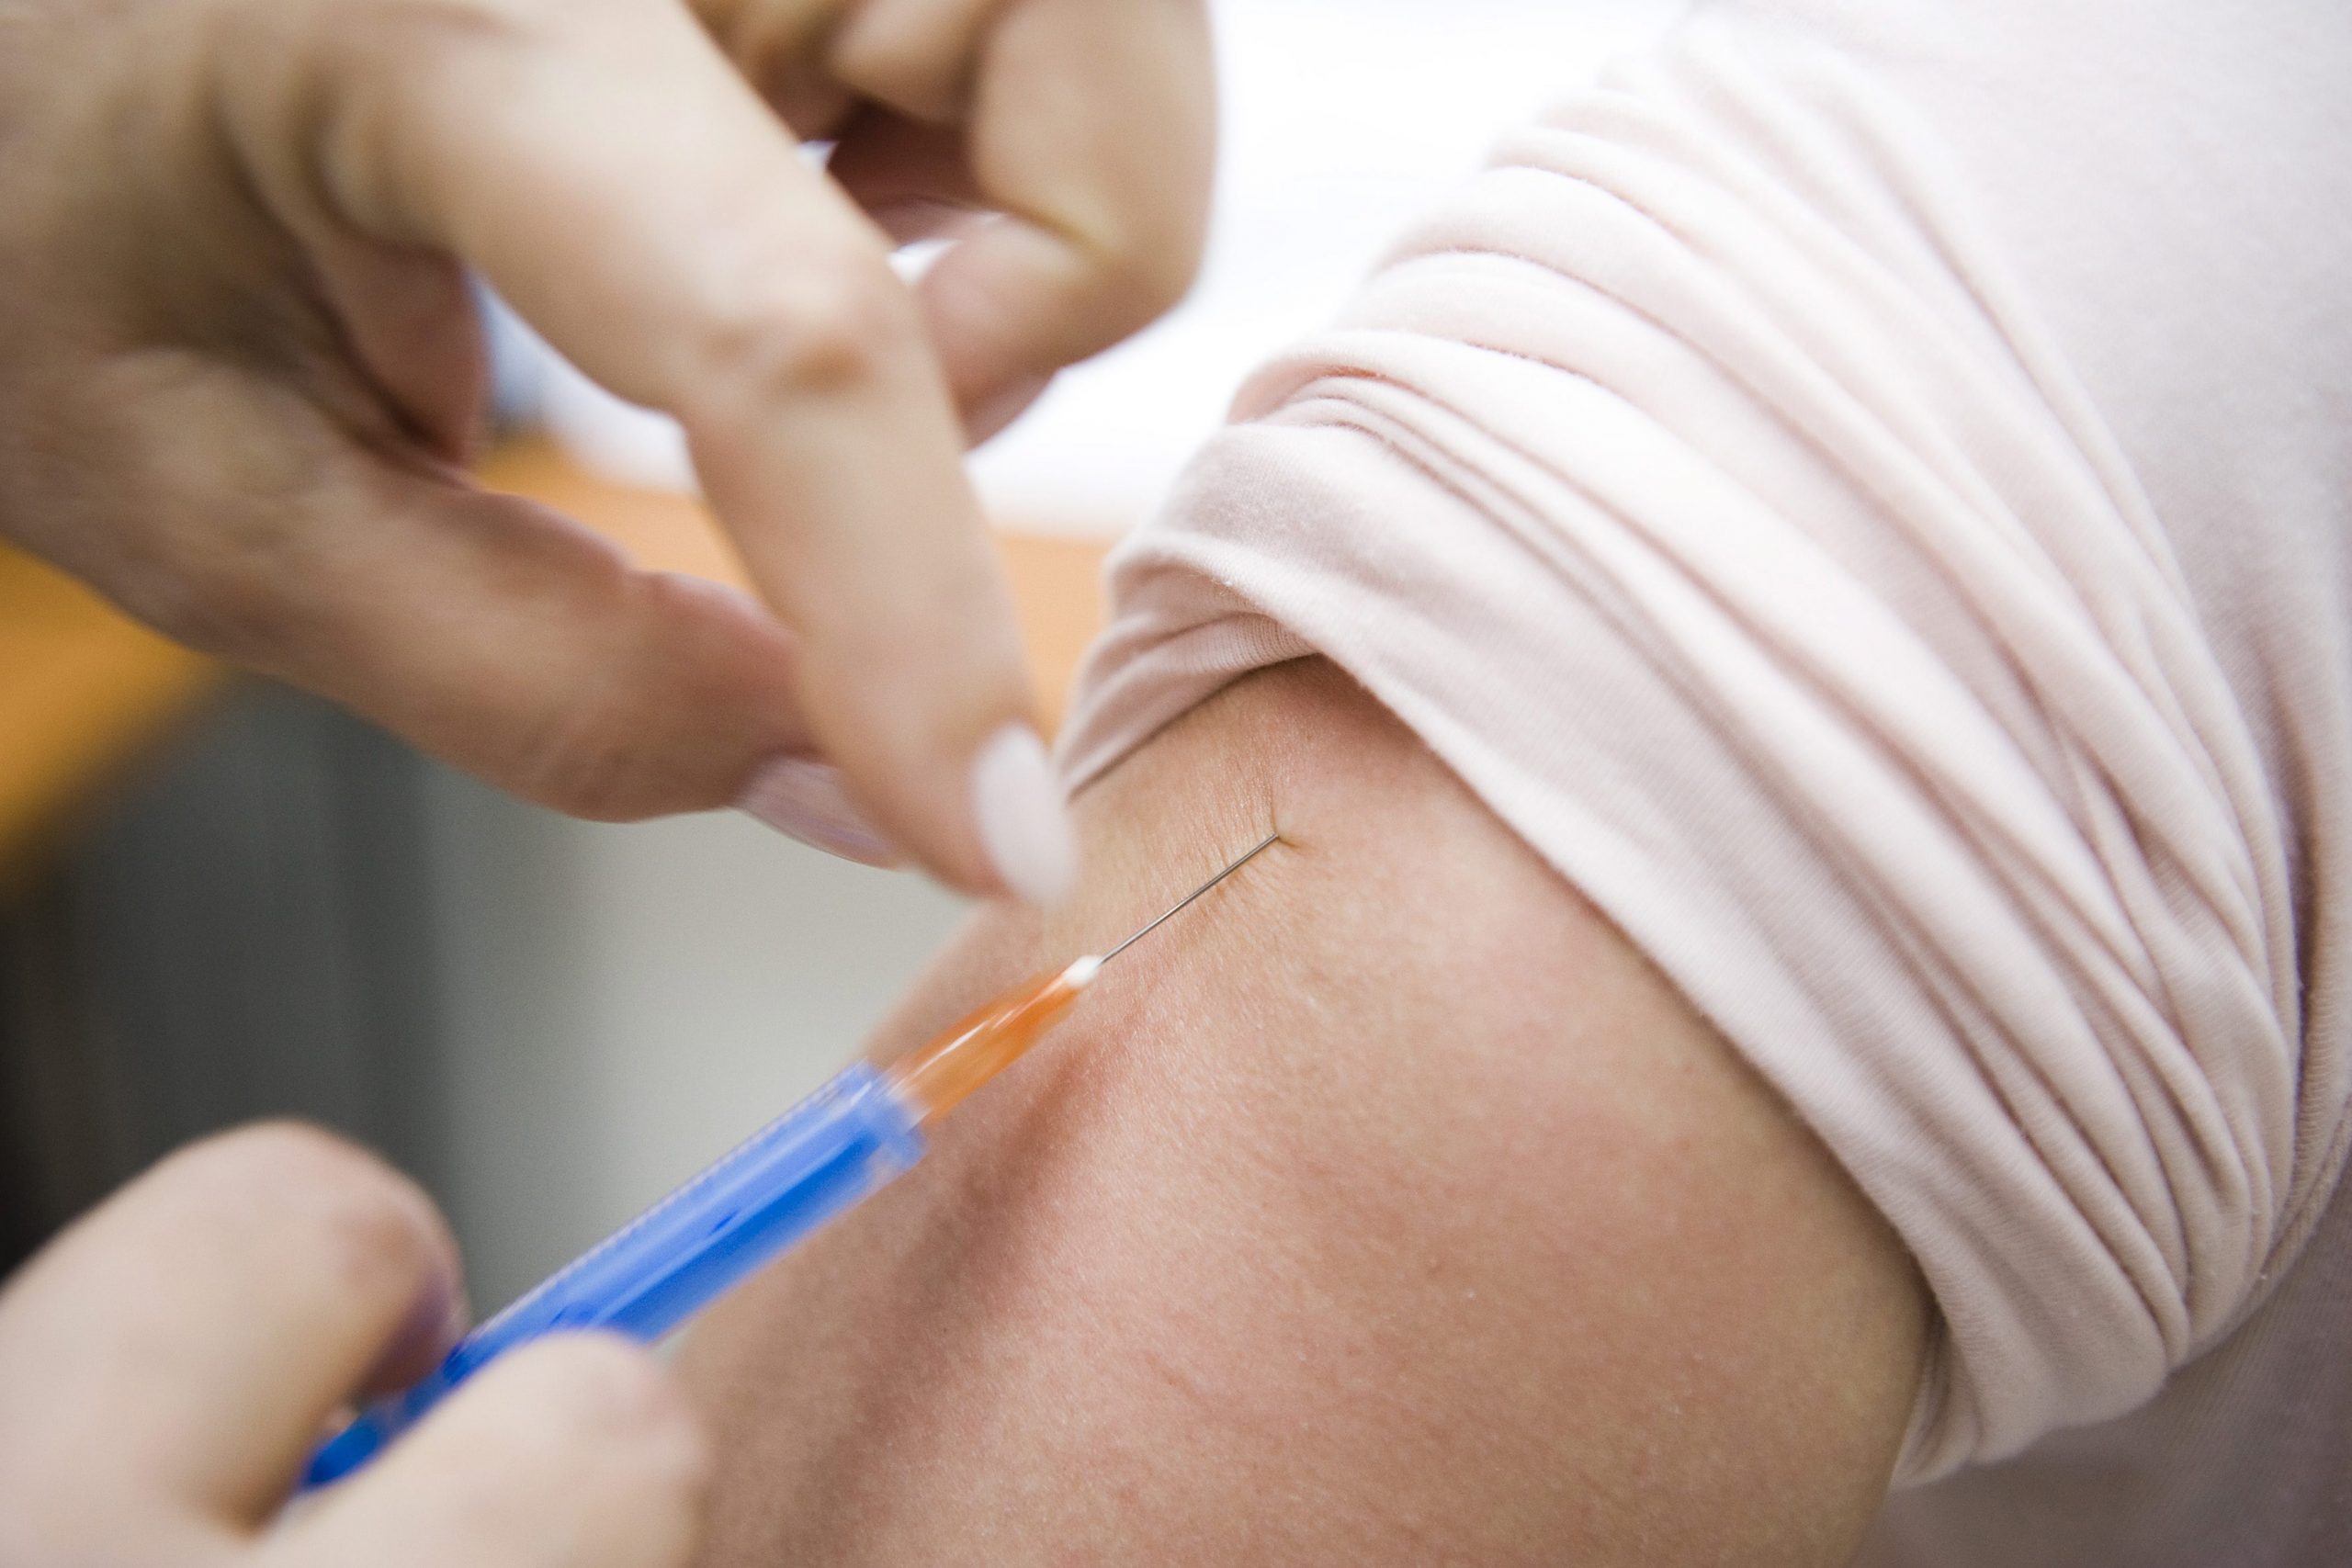 Hungarians Optimistic About the Prospects of a Vaccine